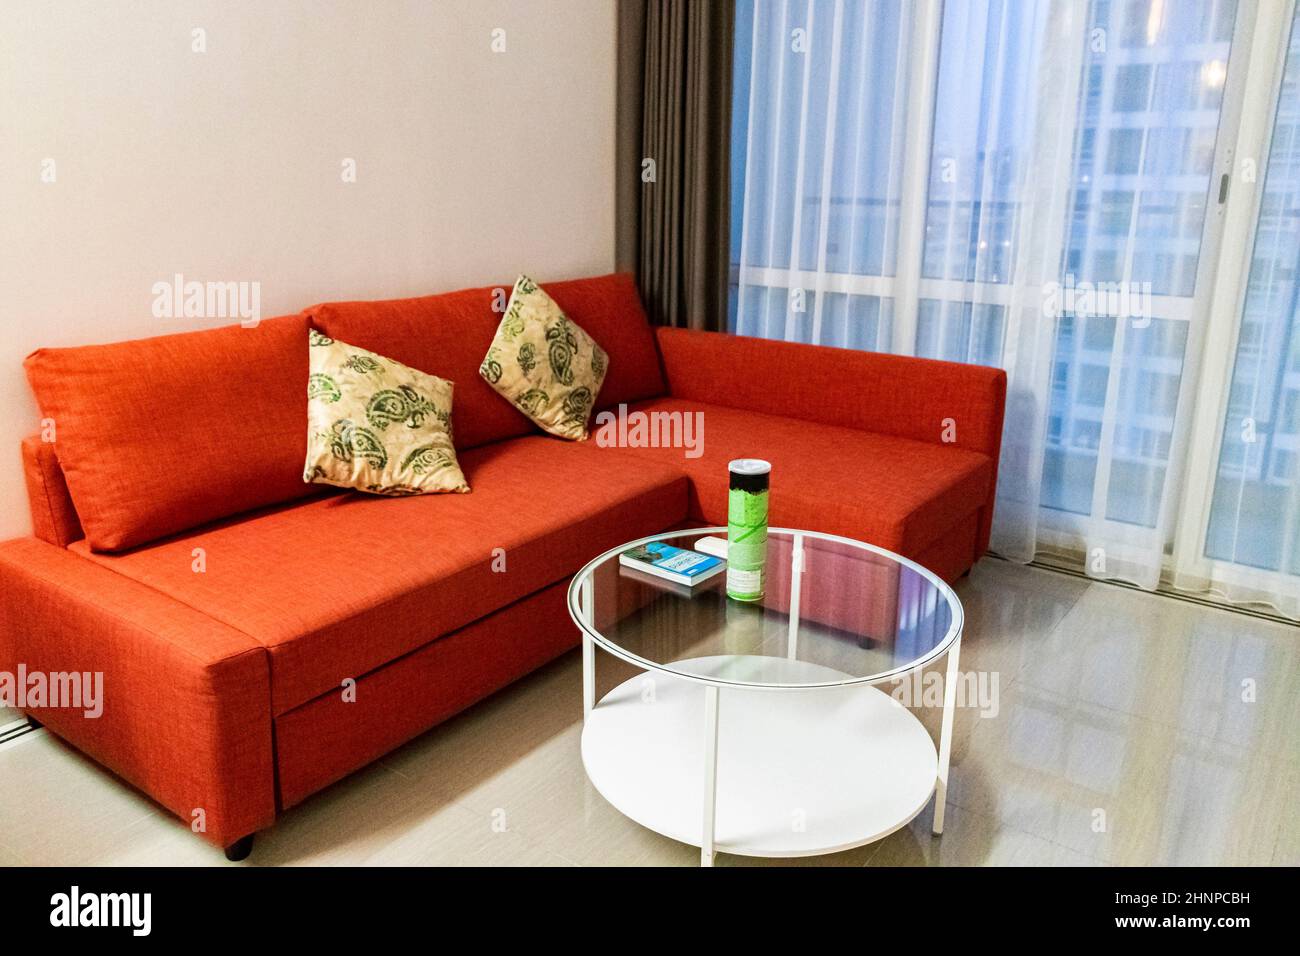 Super clean luxury apartment with red couch Bangkok Thailand. Stock Photo